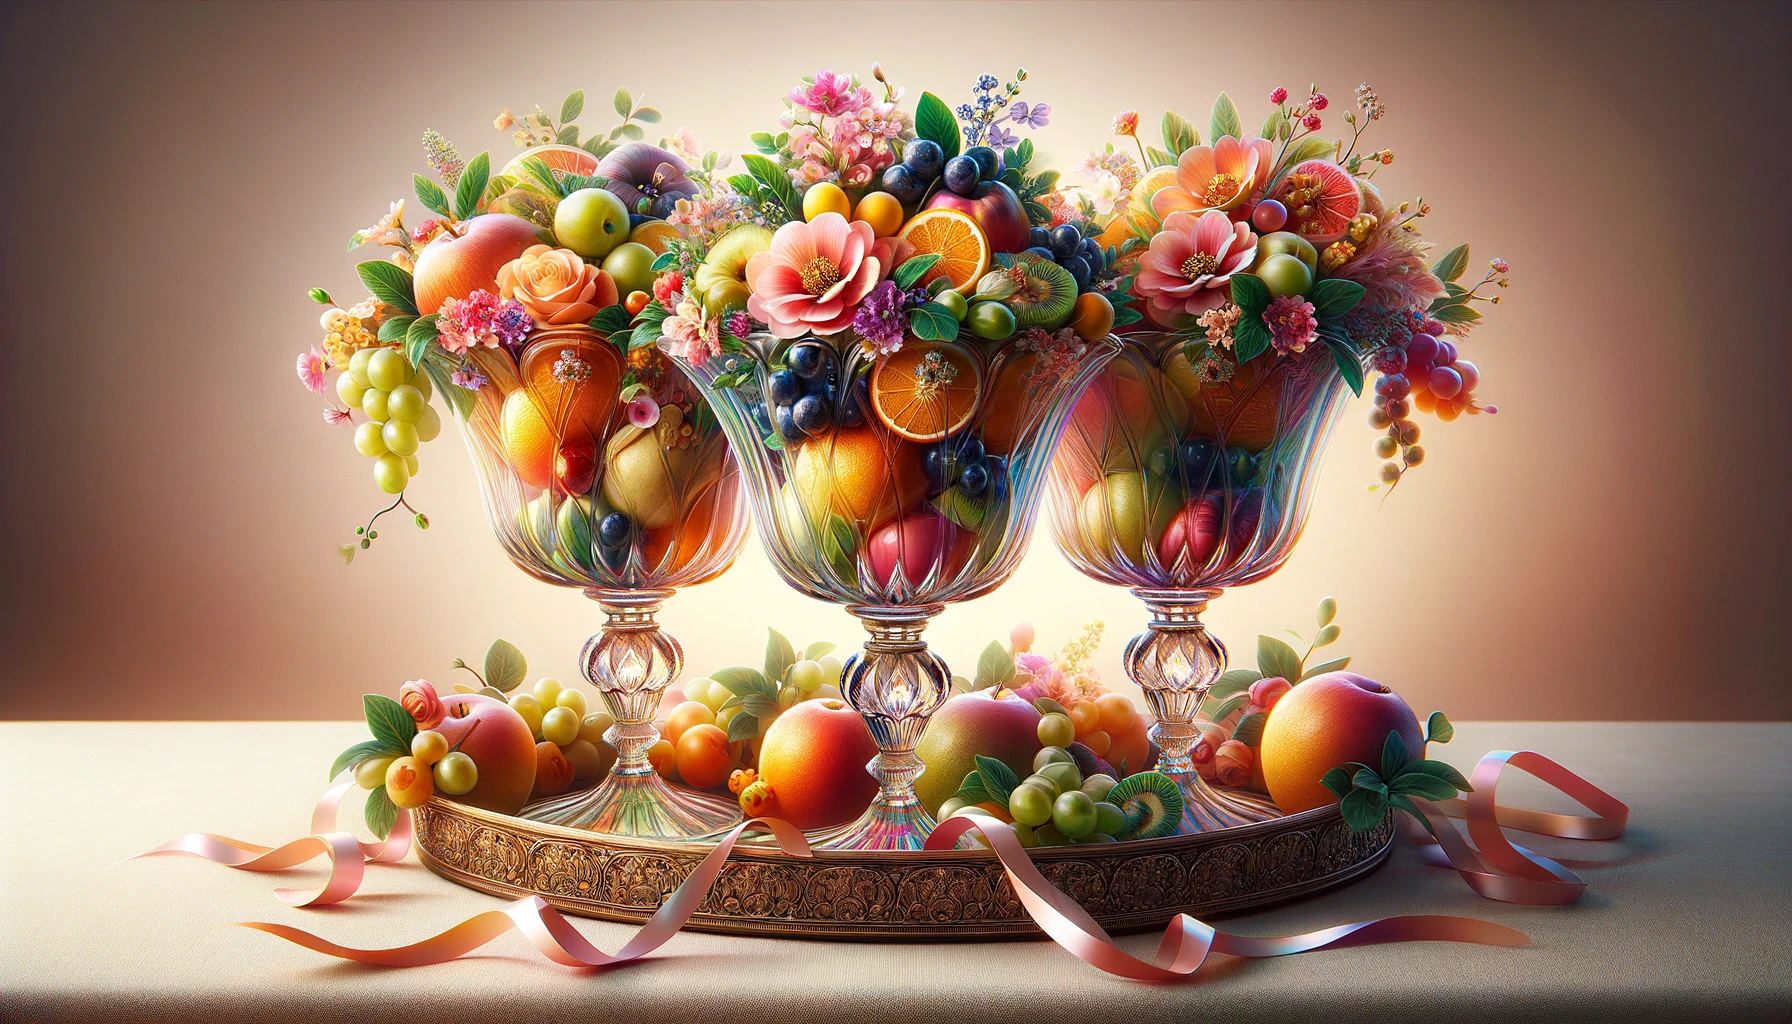 Three vibrant crystal clear cups filled to the brim with an array of luscious fruits and colorful flowers elegantly intertwined with delicate ribbon